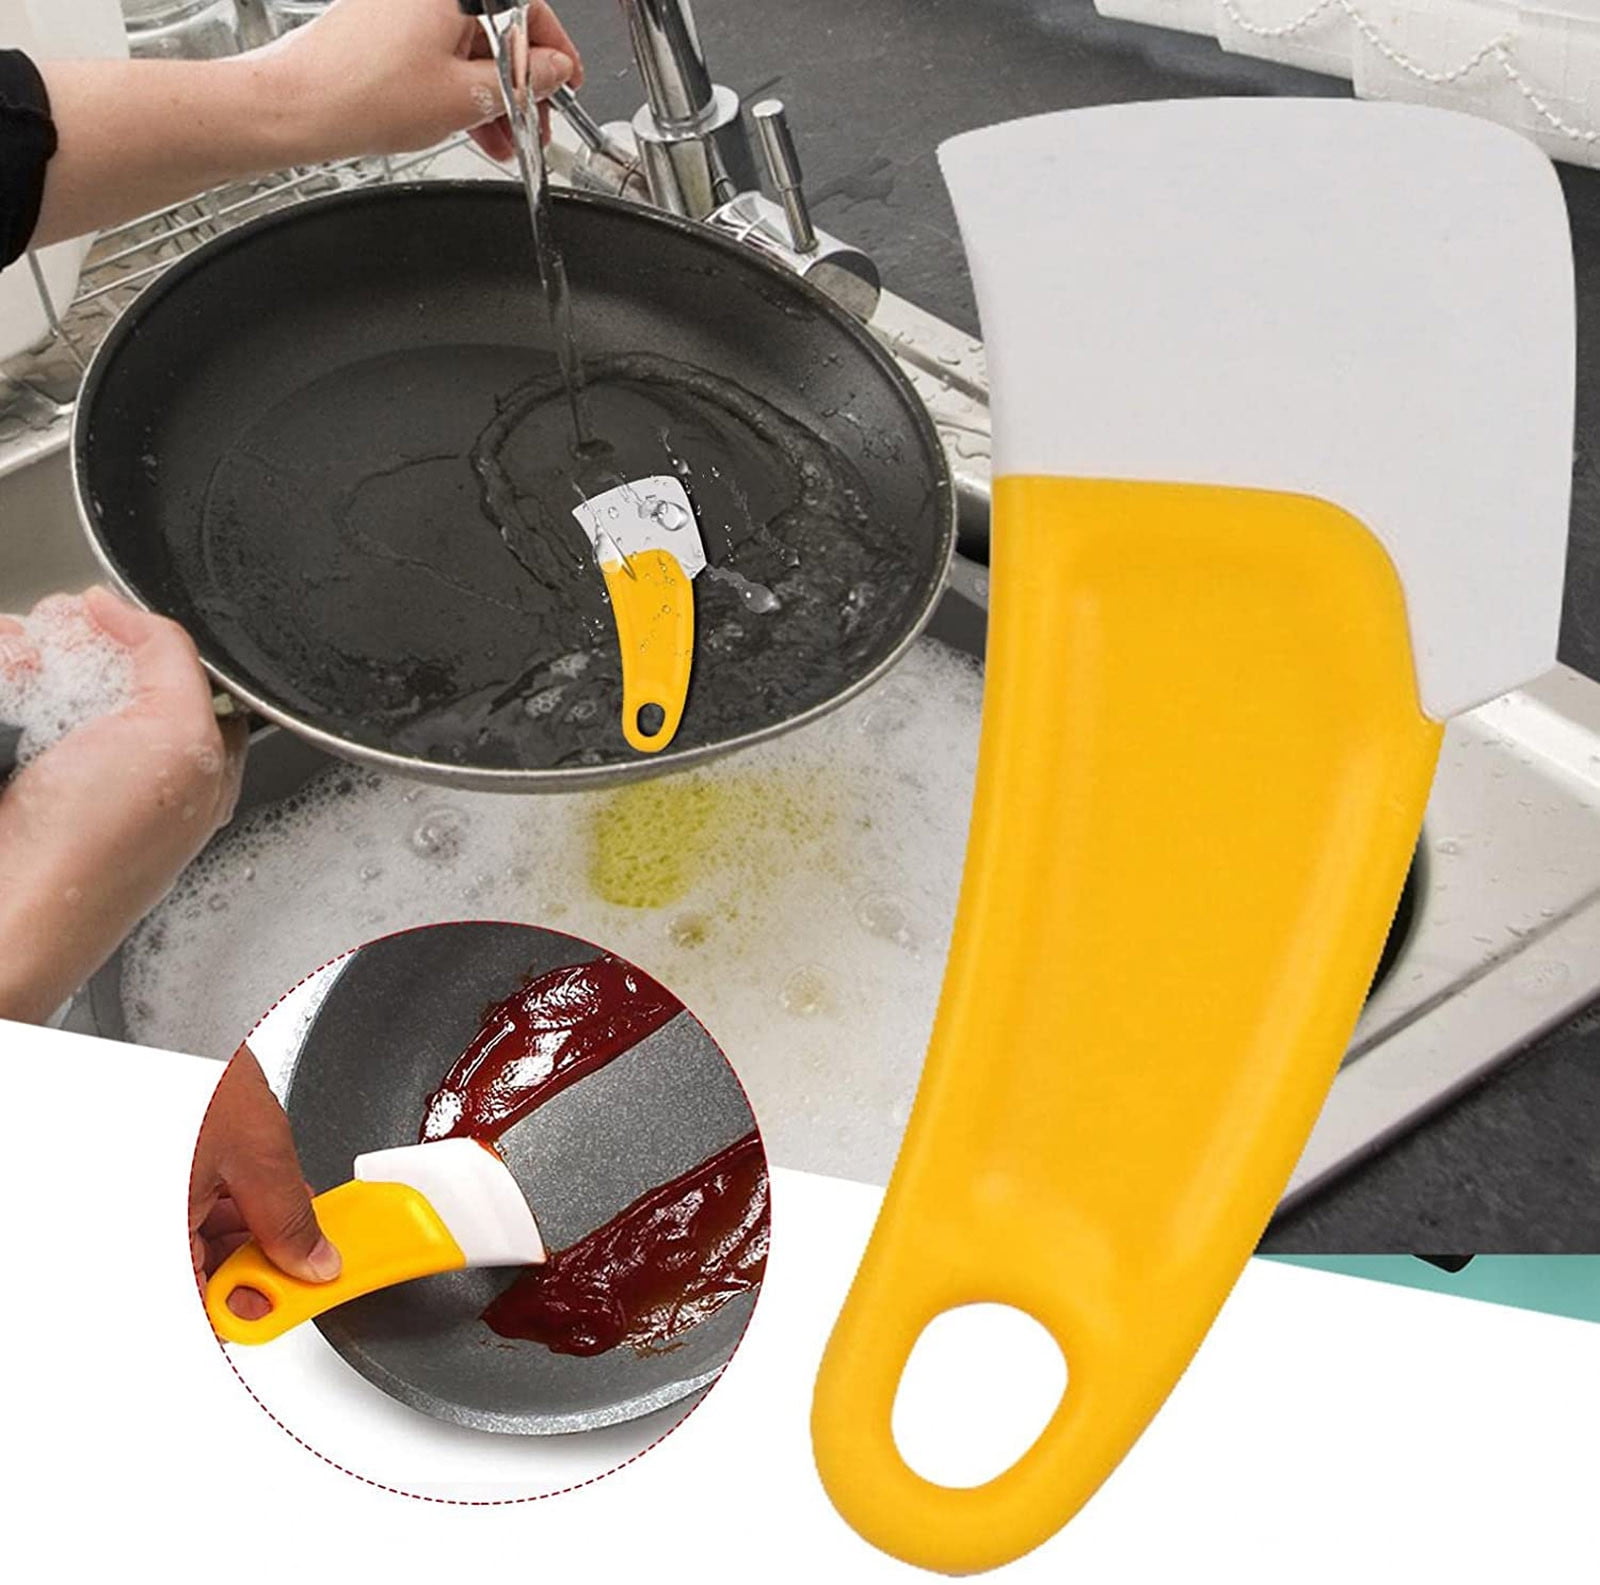 KitchenVIA 3pc Pan Scraper Tool, Non-Stick Scraping Edge, Easy Grip Shape, Safe on Pots, Pans, Glass, Stainless Steel, Iron, and Dishes